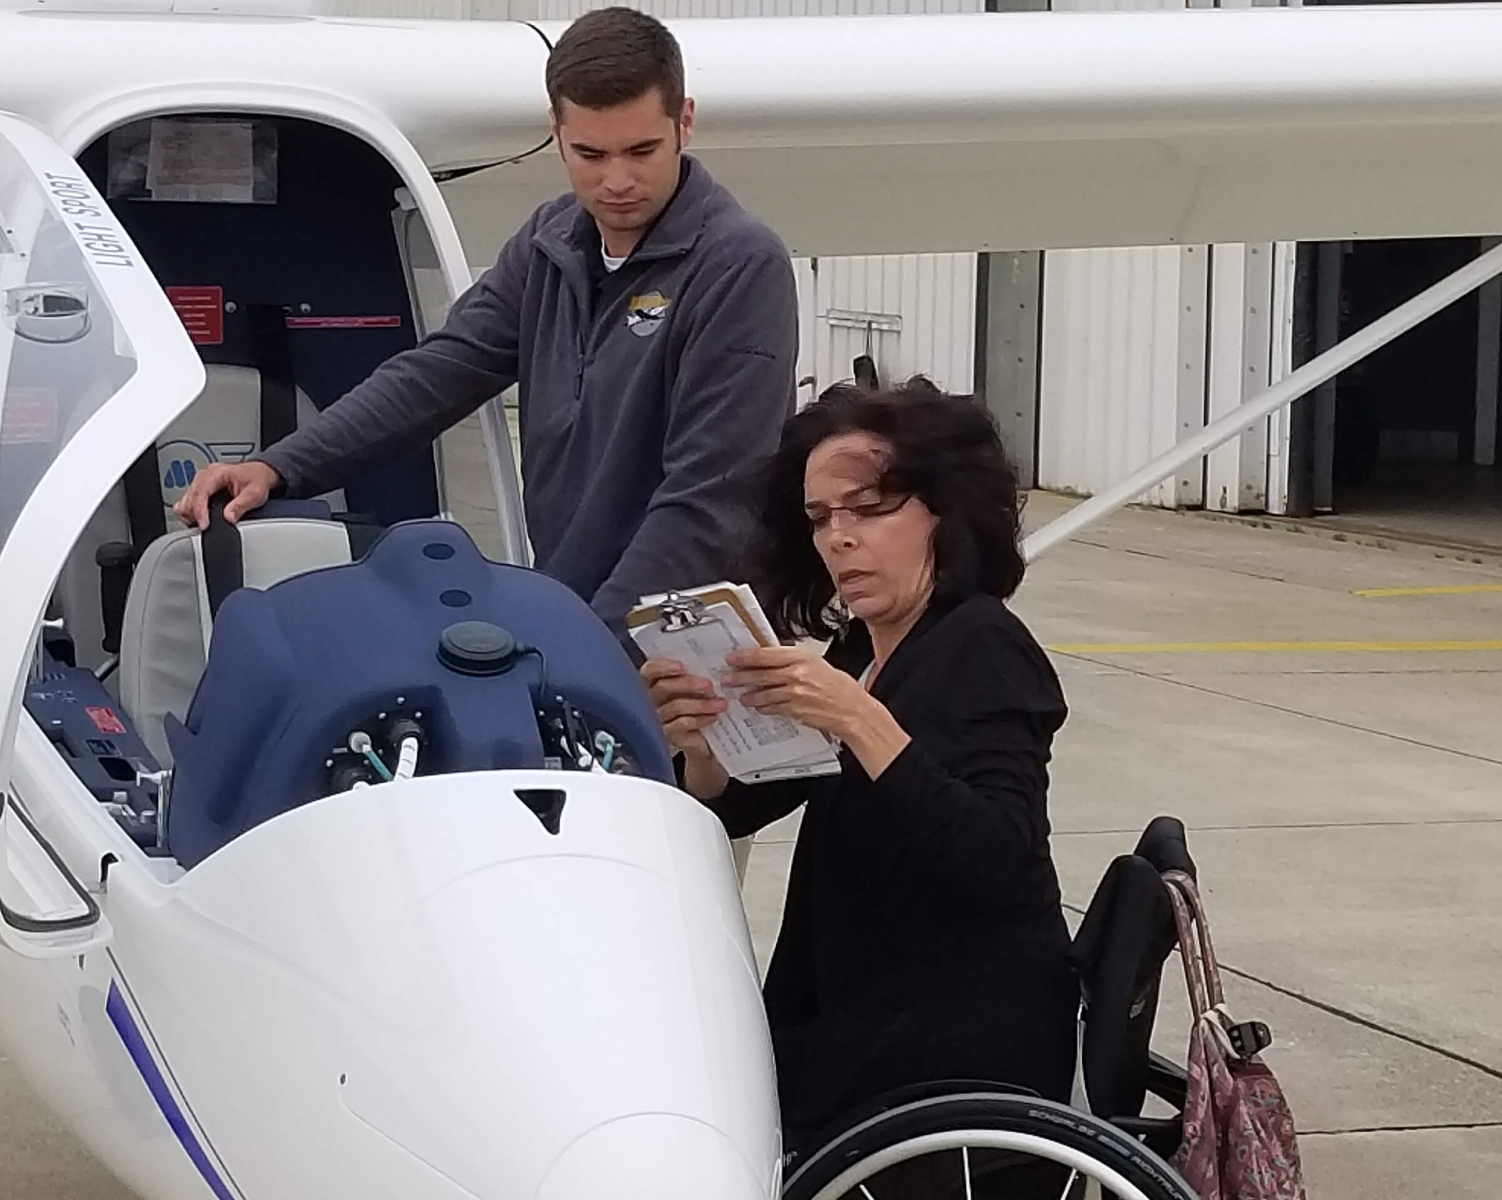 Able Flight student Emily Hupe of California goes through her pre-flight checklist last year at Purdue University Airport. (Purdue University photo/Brian Huchel)